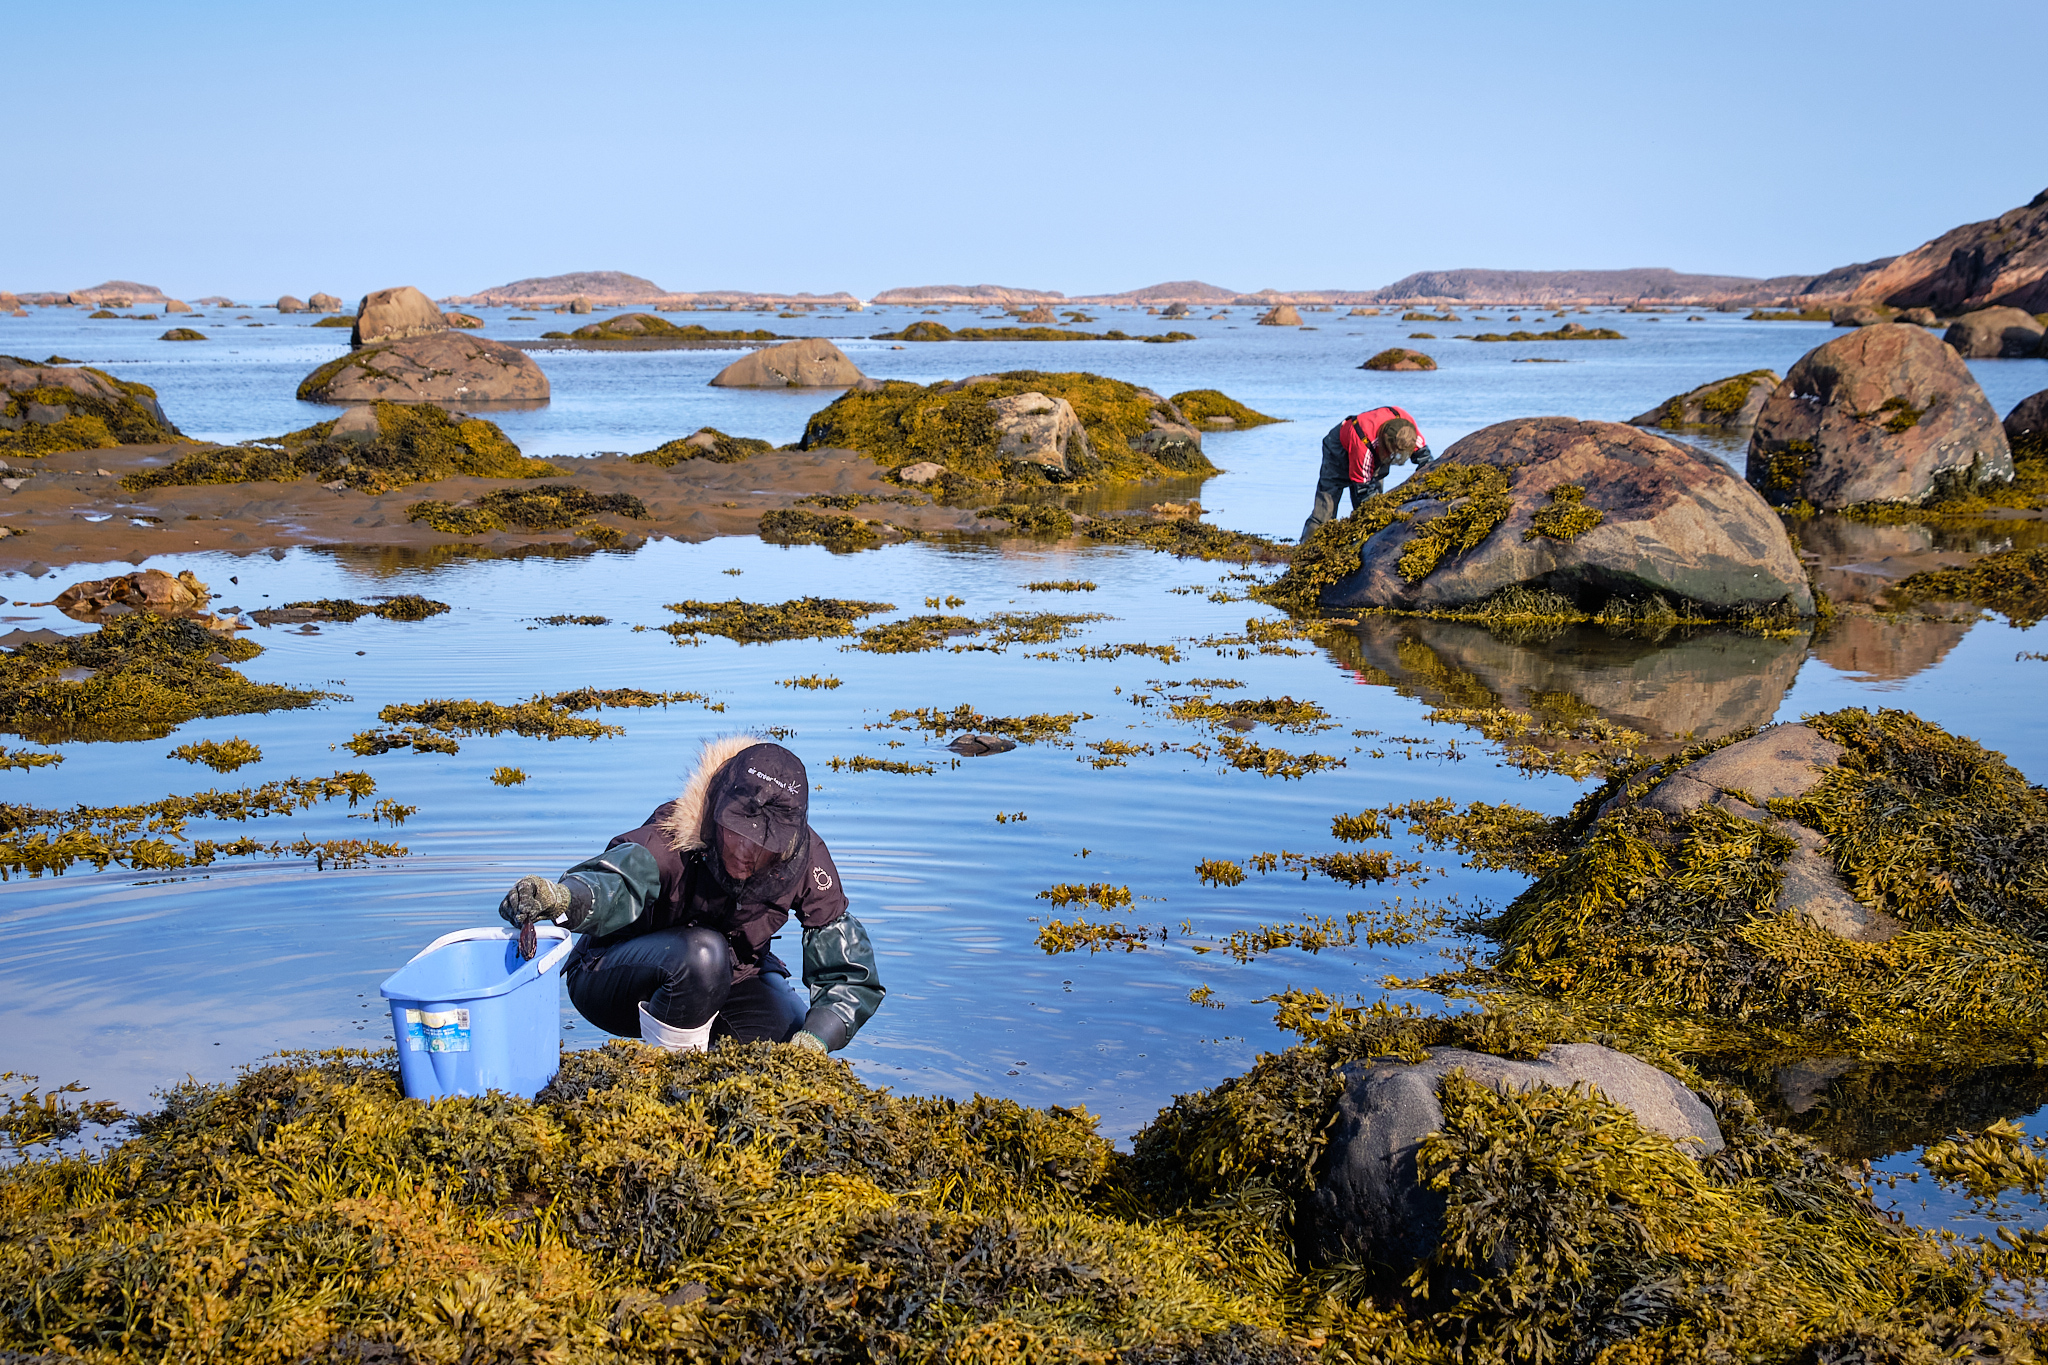 collecting mussels at low tide at Sassannguit - Sisimiut - Greenland